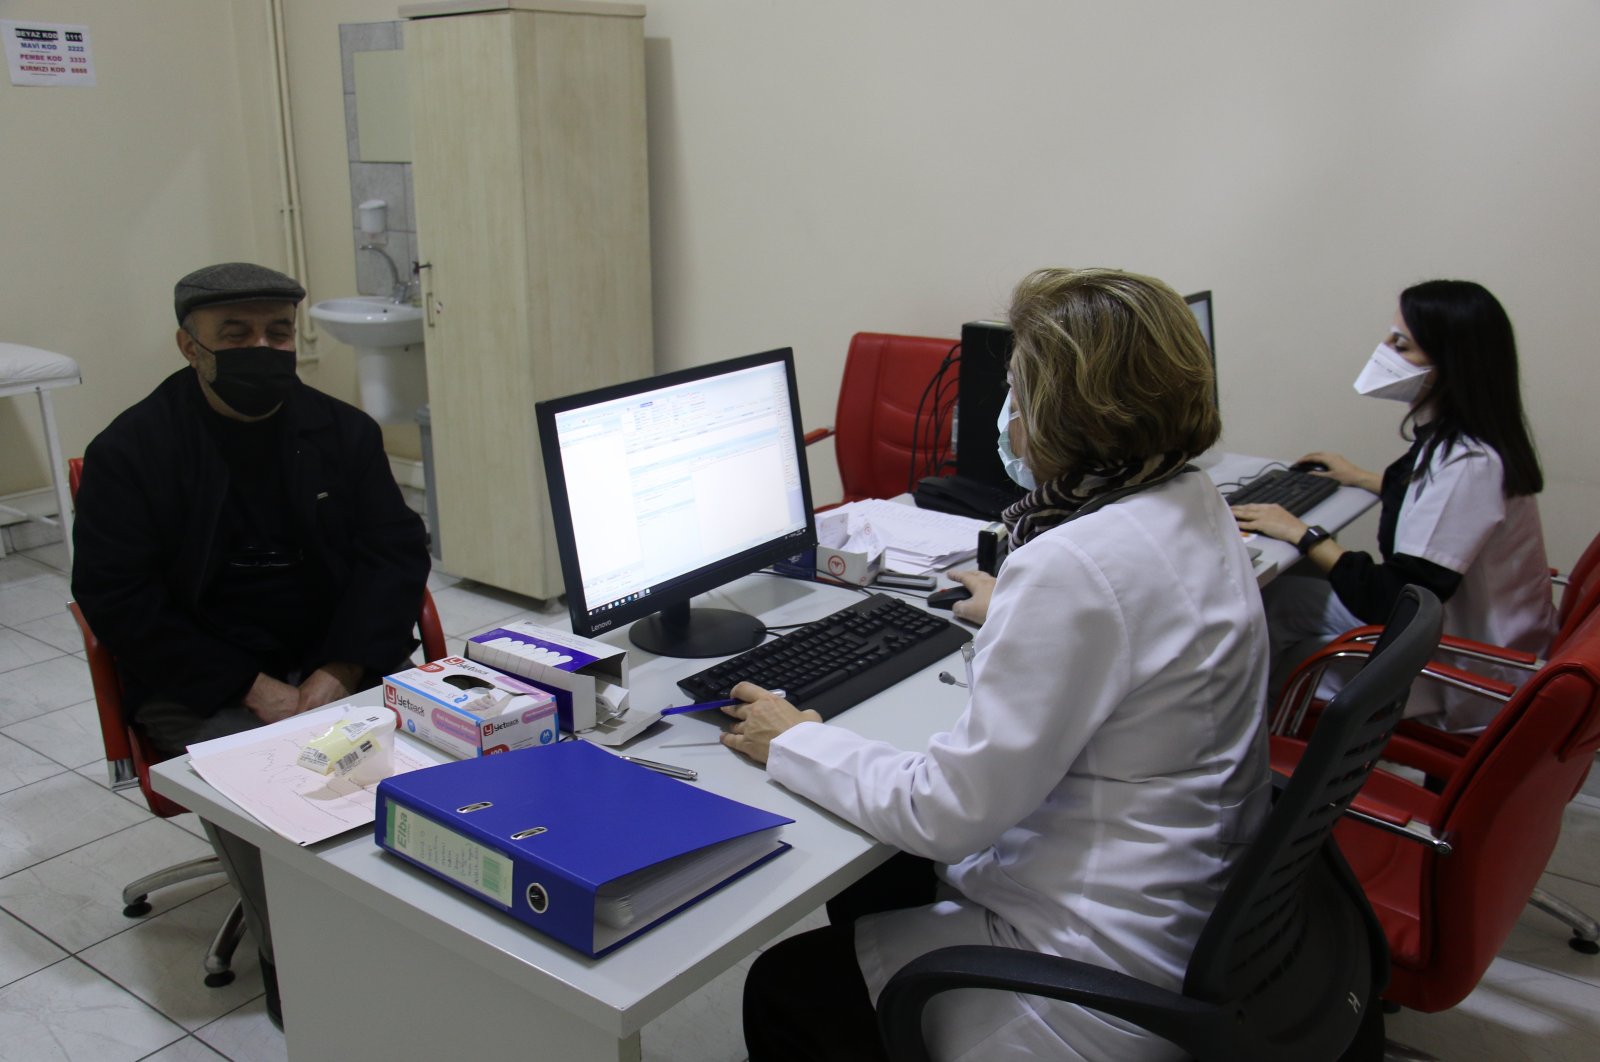 Staff at a monitoring center interview a patient who recovered from COVID-19, in the capital Ankara, Turkey, Dec. 16, 2020. (IHA Photo)